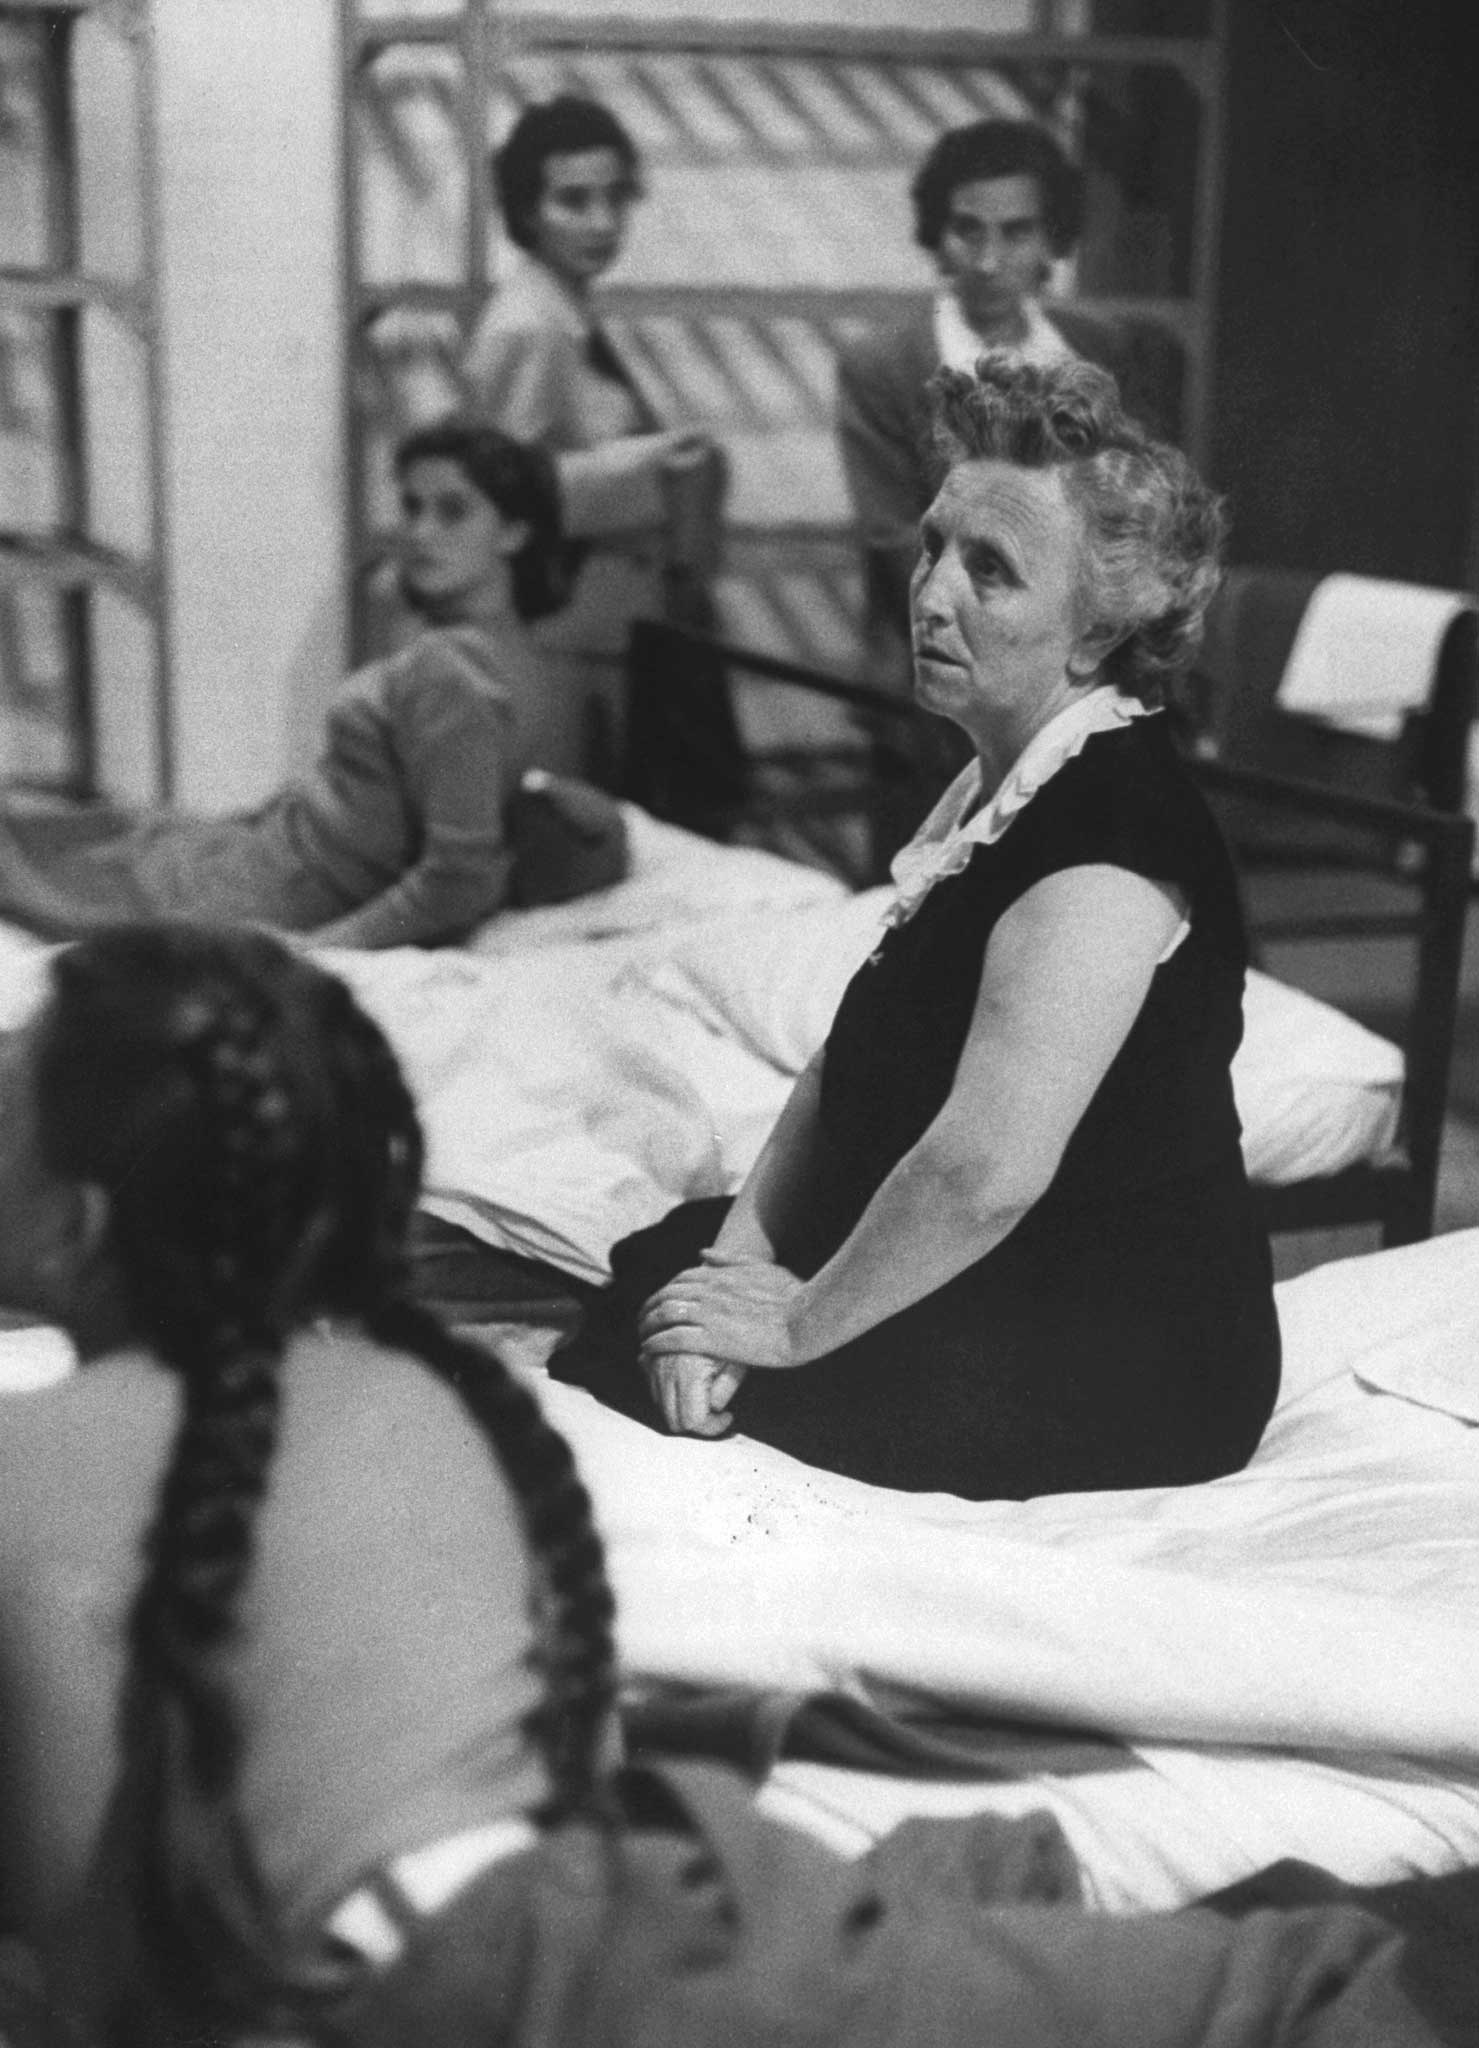 "In women's dormitory, separated from husbands, wives sit silently on their beds. At right is Maria Palmerini of Italy, here for a six-month visit. She receives same treatment as those who will stay."